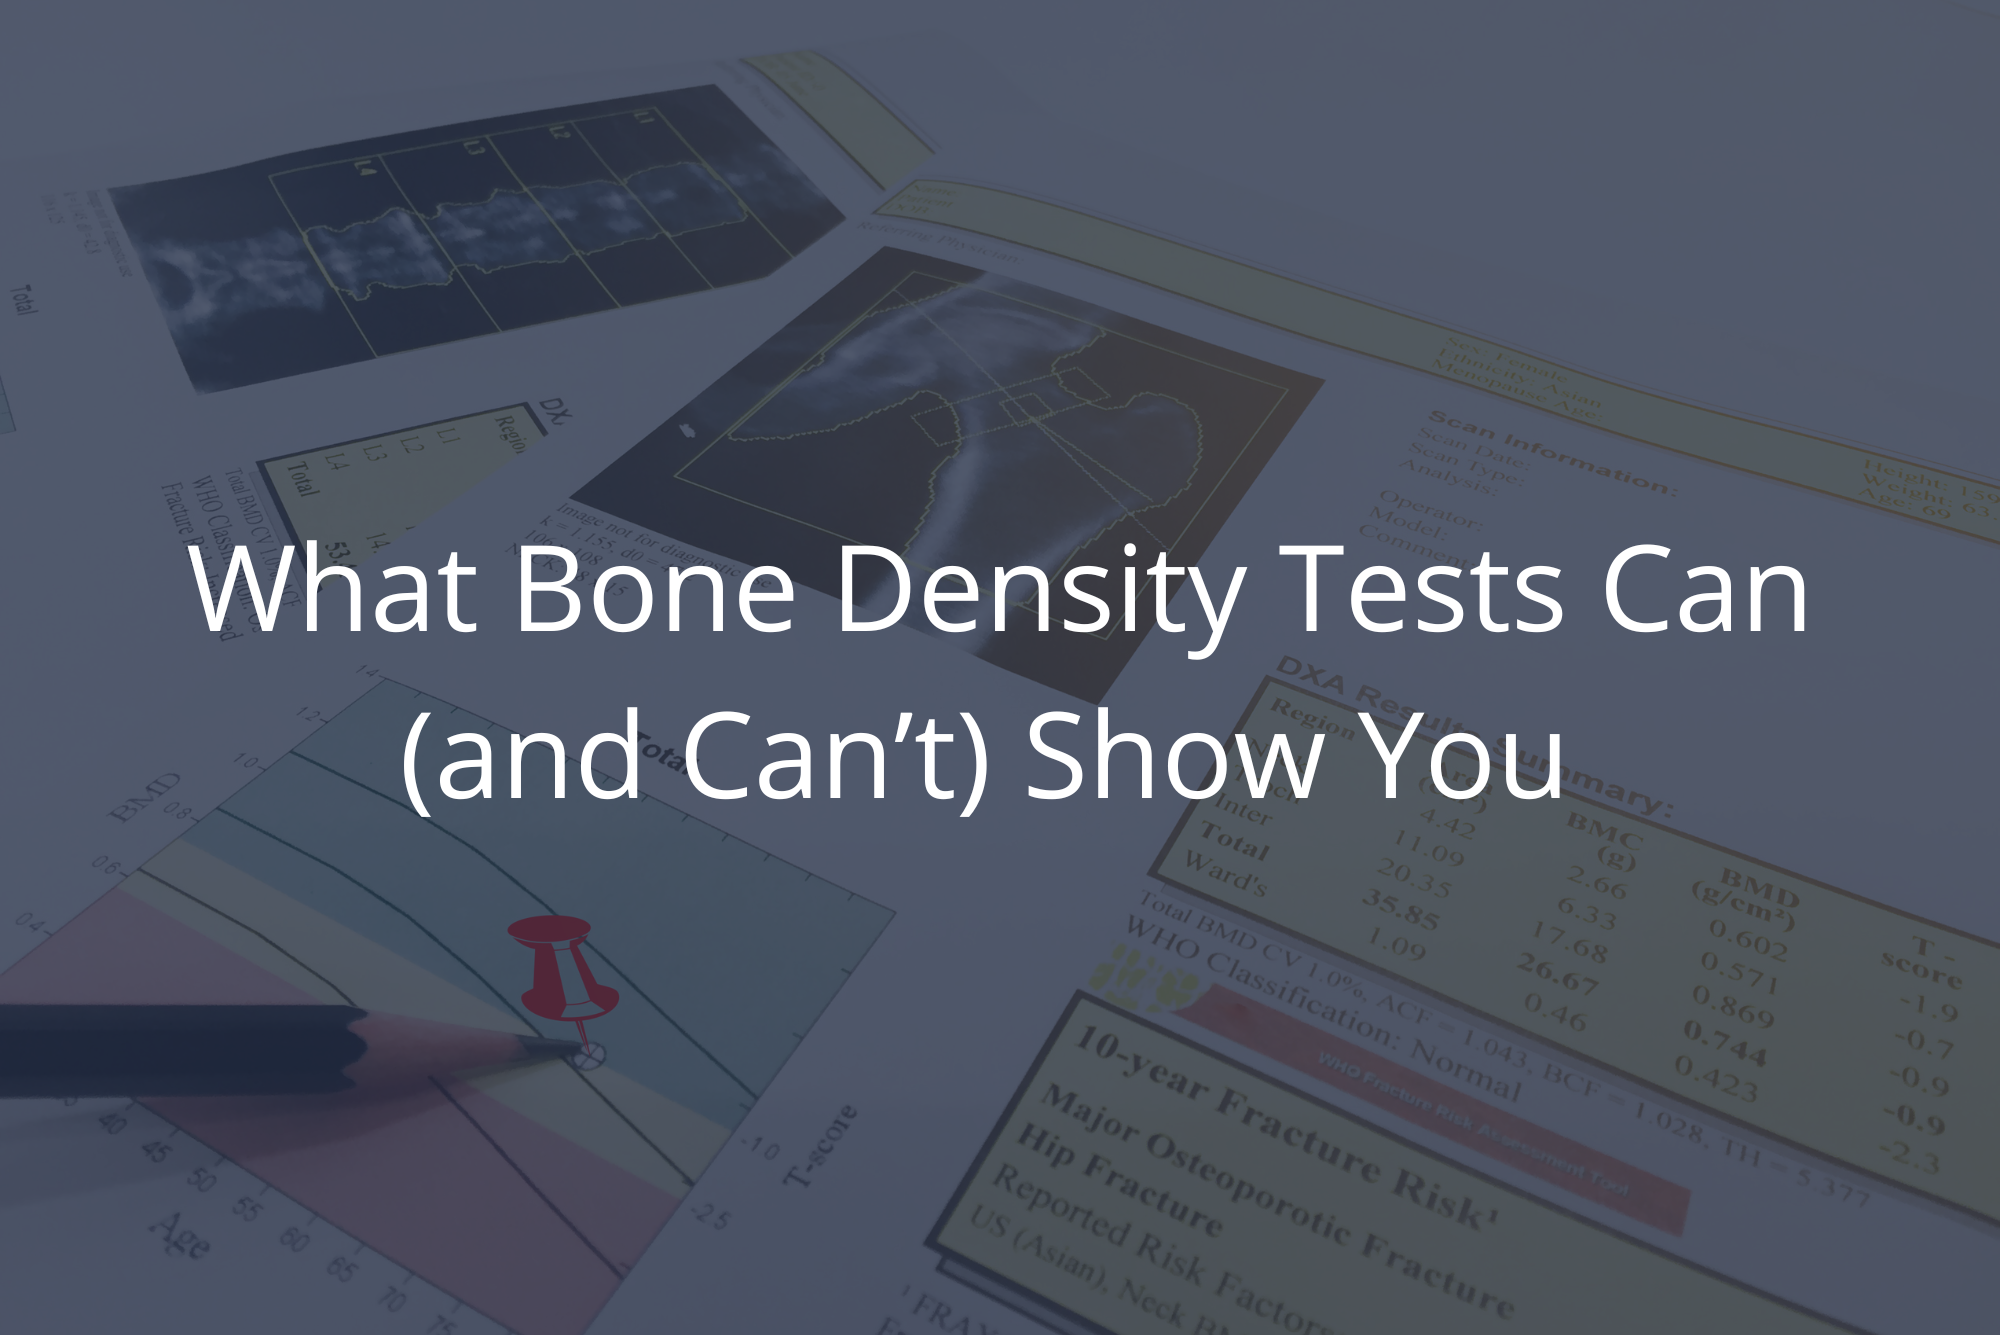 Results from a bone density test lay on a table, showing what they can detect, with a dark overlay.